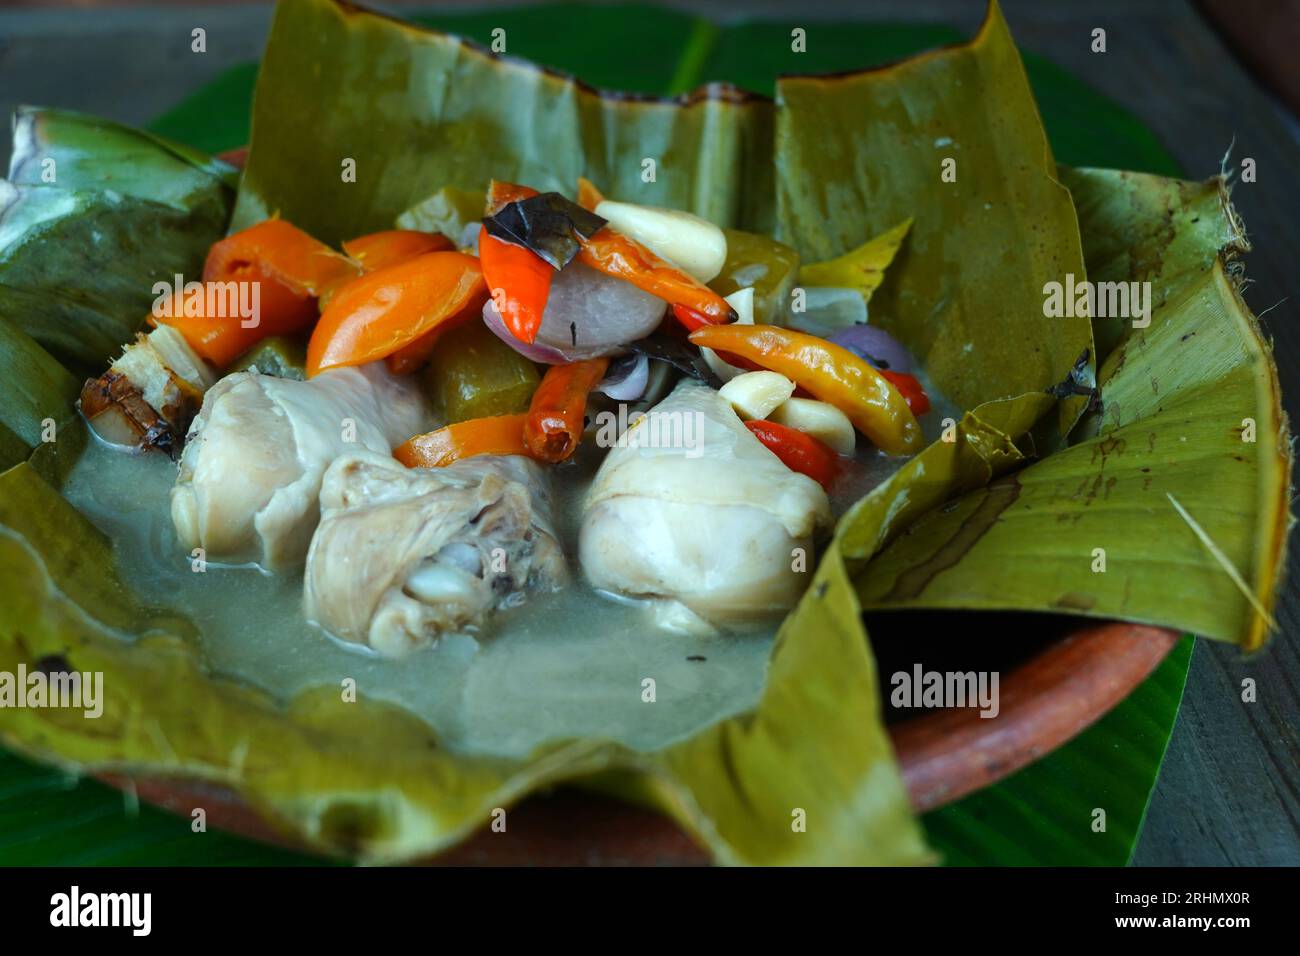 Garang Asem, the traditional Javanese food is served on a clay plate, lined with banana leaves and accompanied by a mixture of bird eye chili, tomatoe Stock Photo